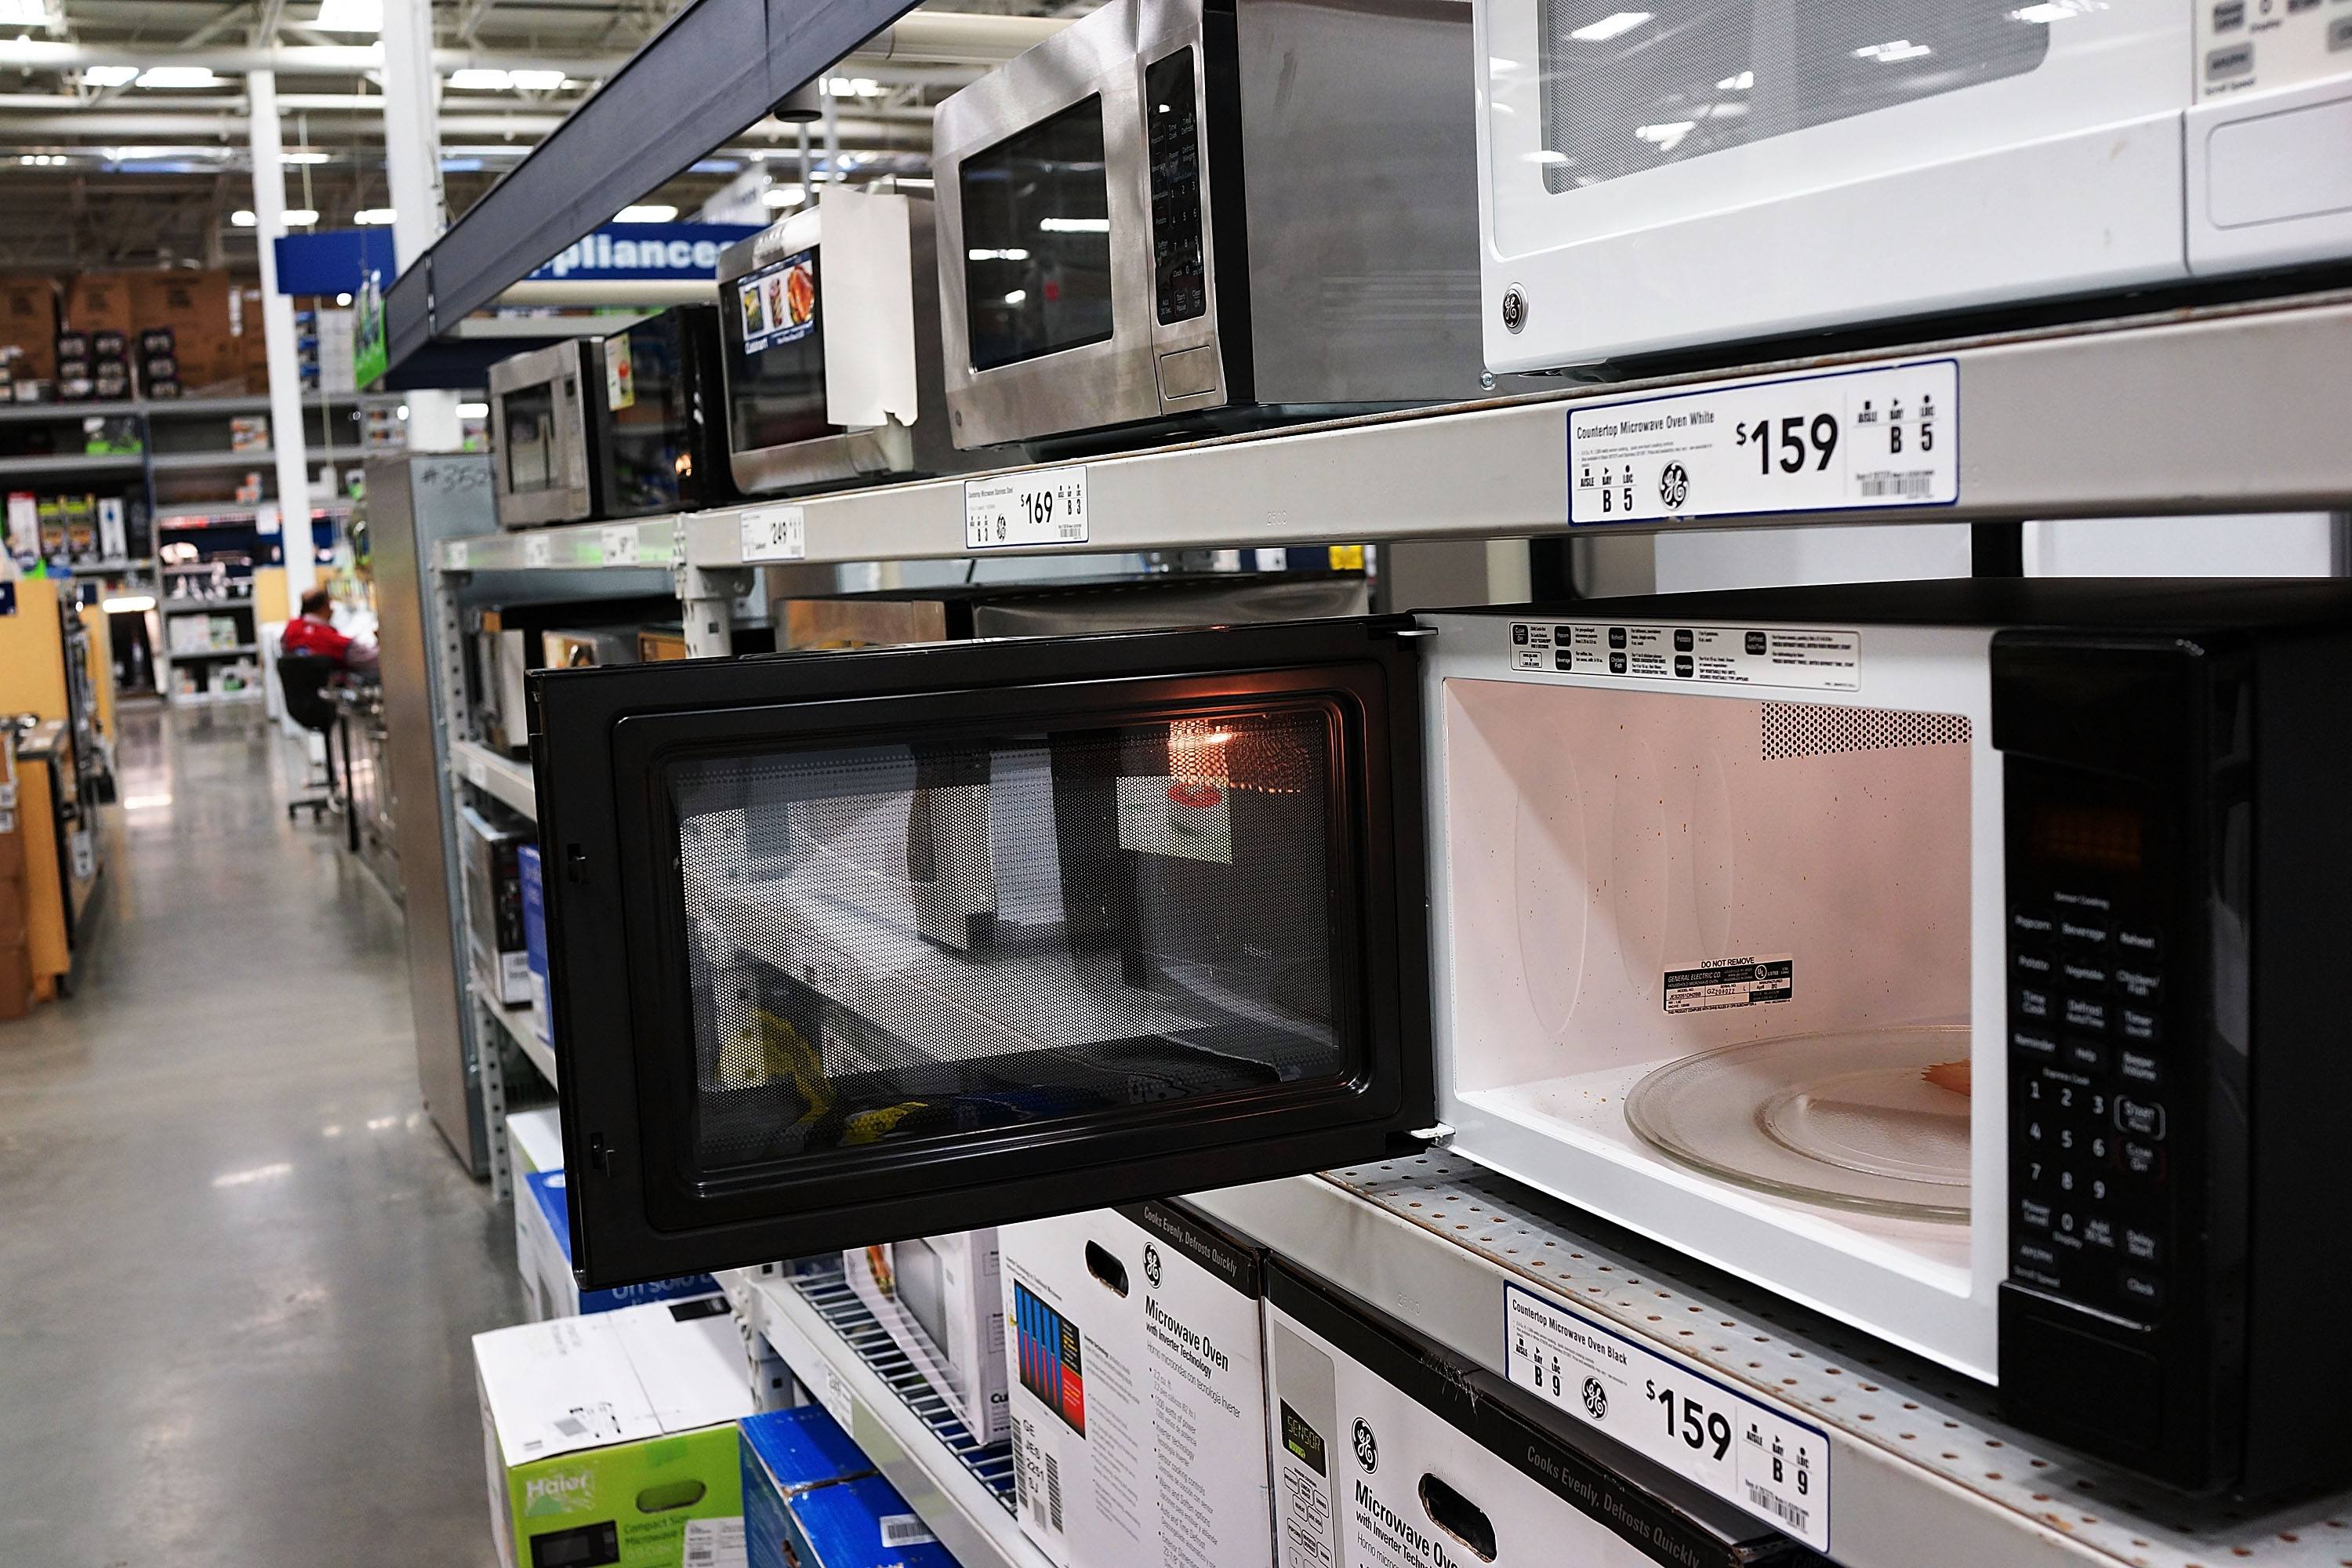 Microwave ovens are on display in a home furnishing store